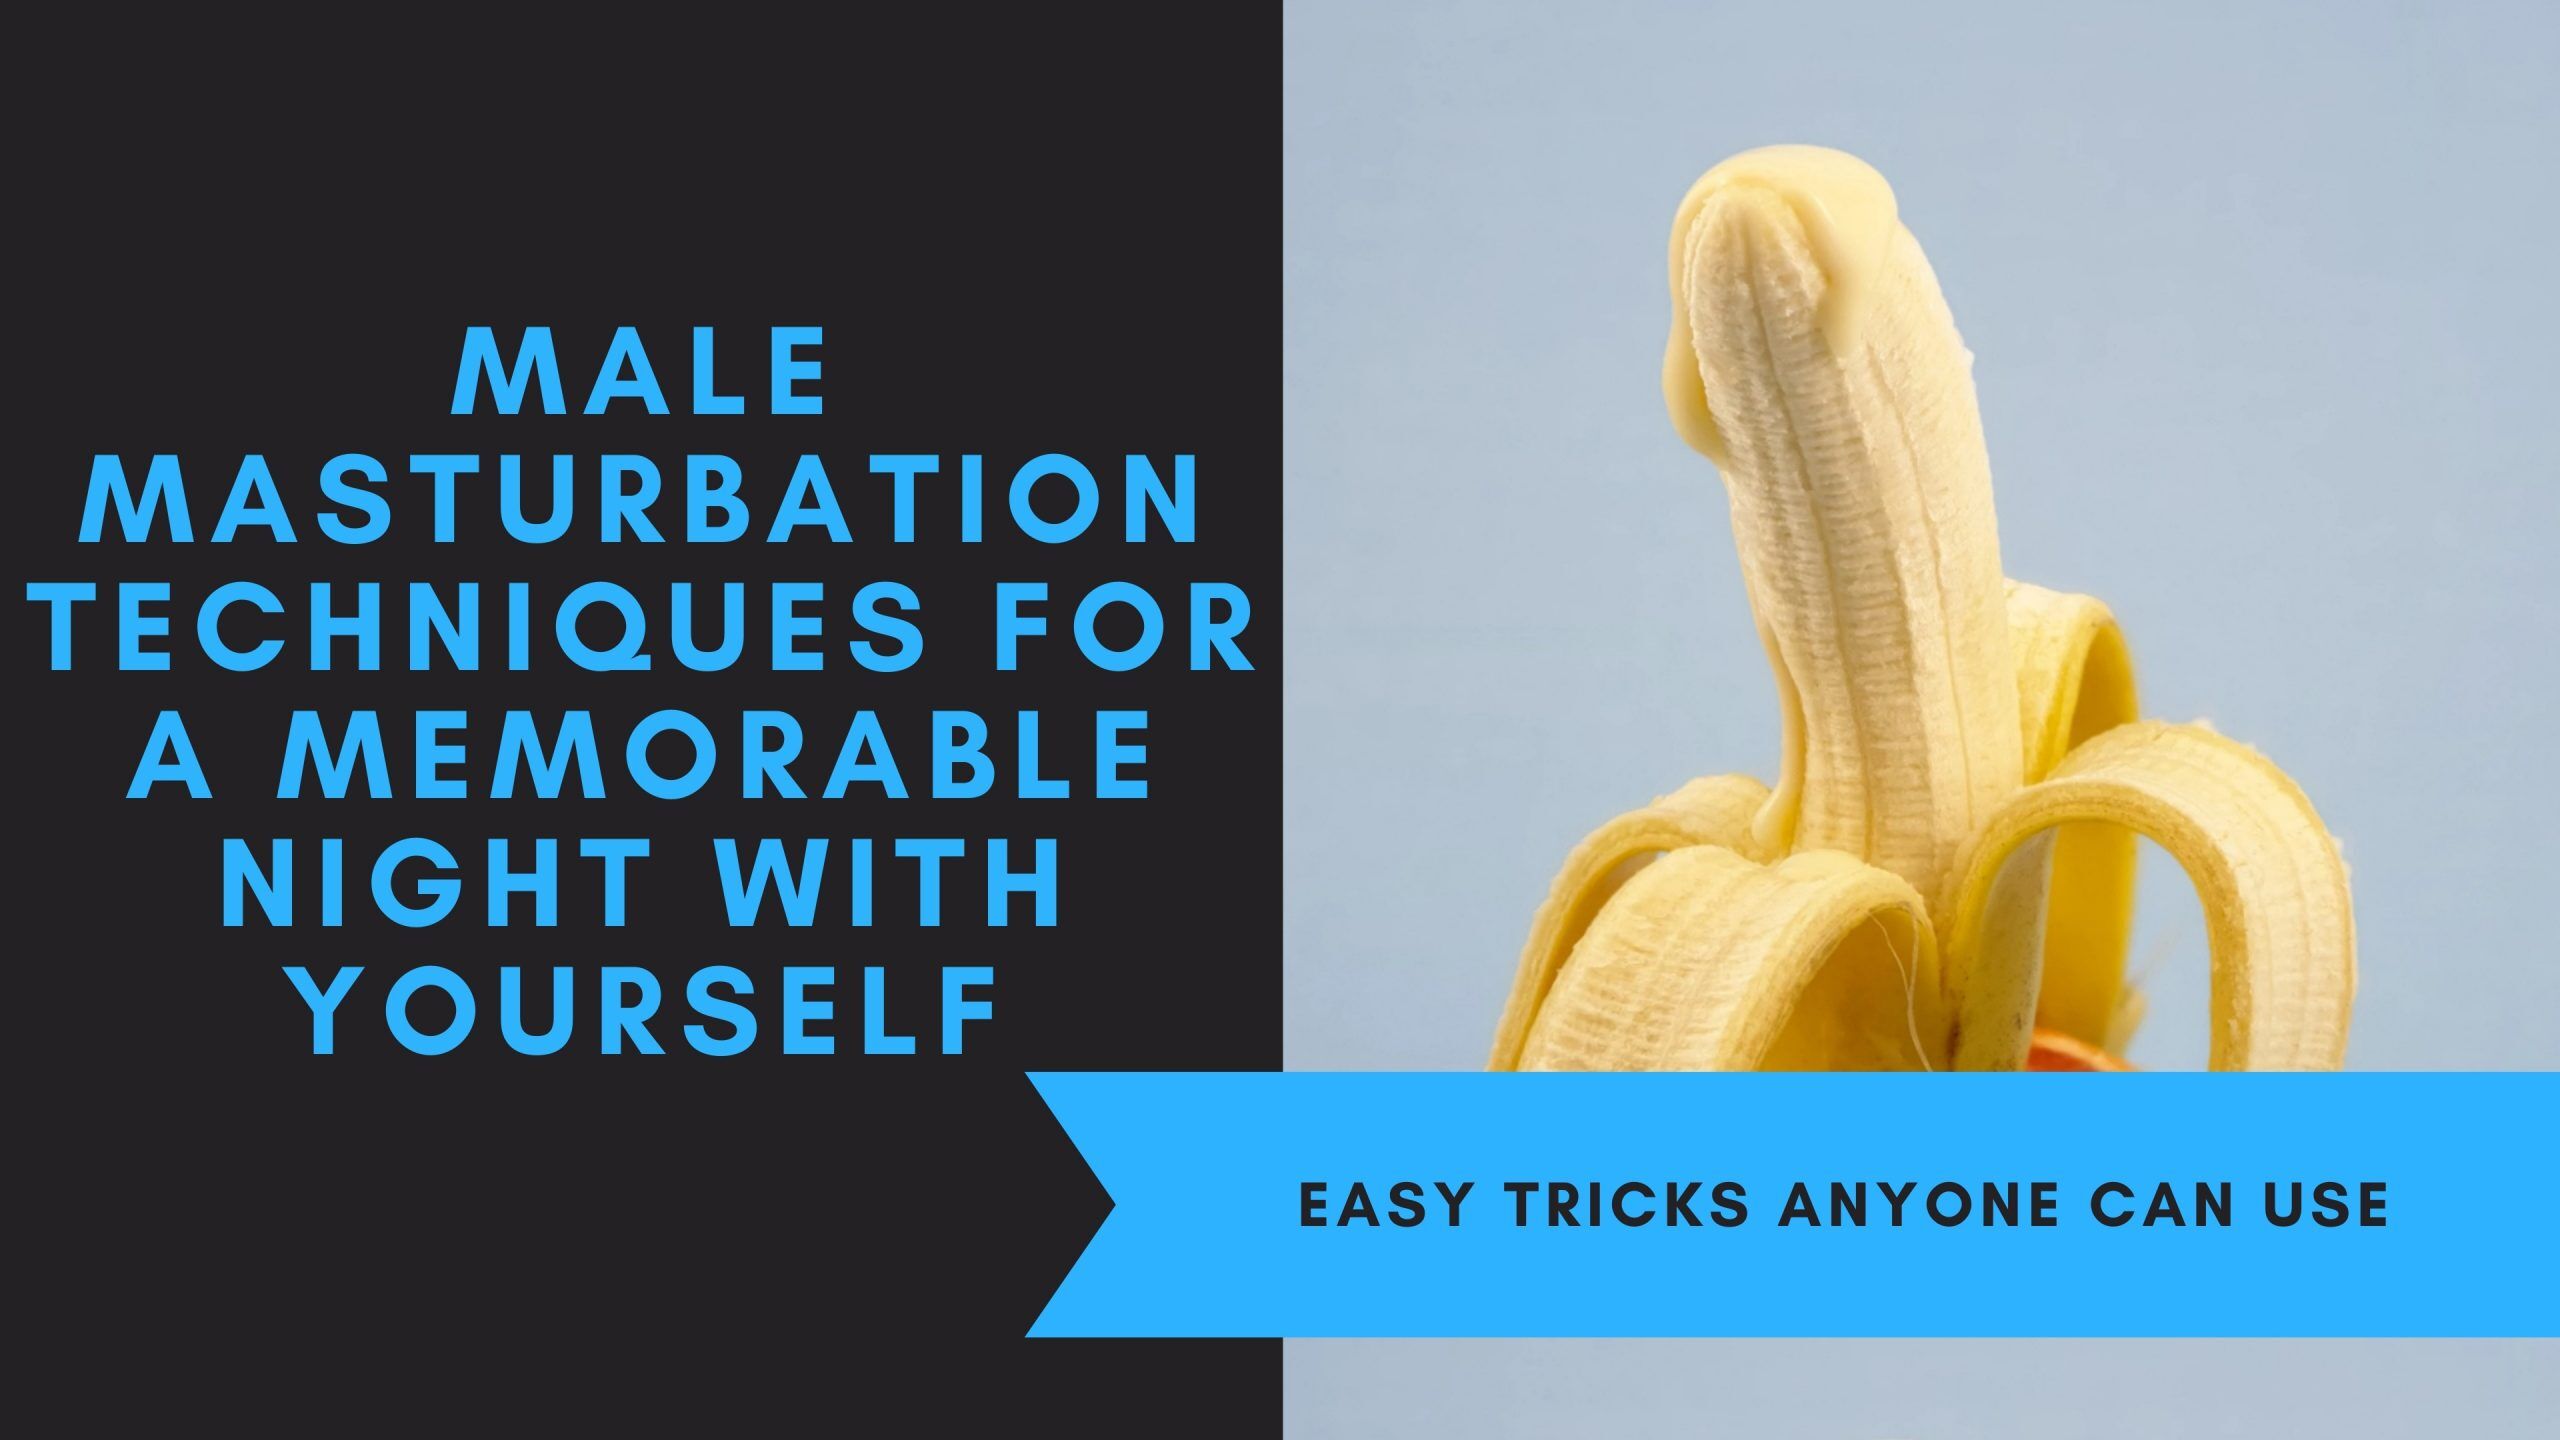 Male Masturbation Techniques For A Memorable Night With Yourself